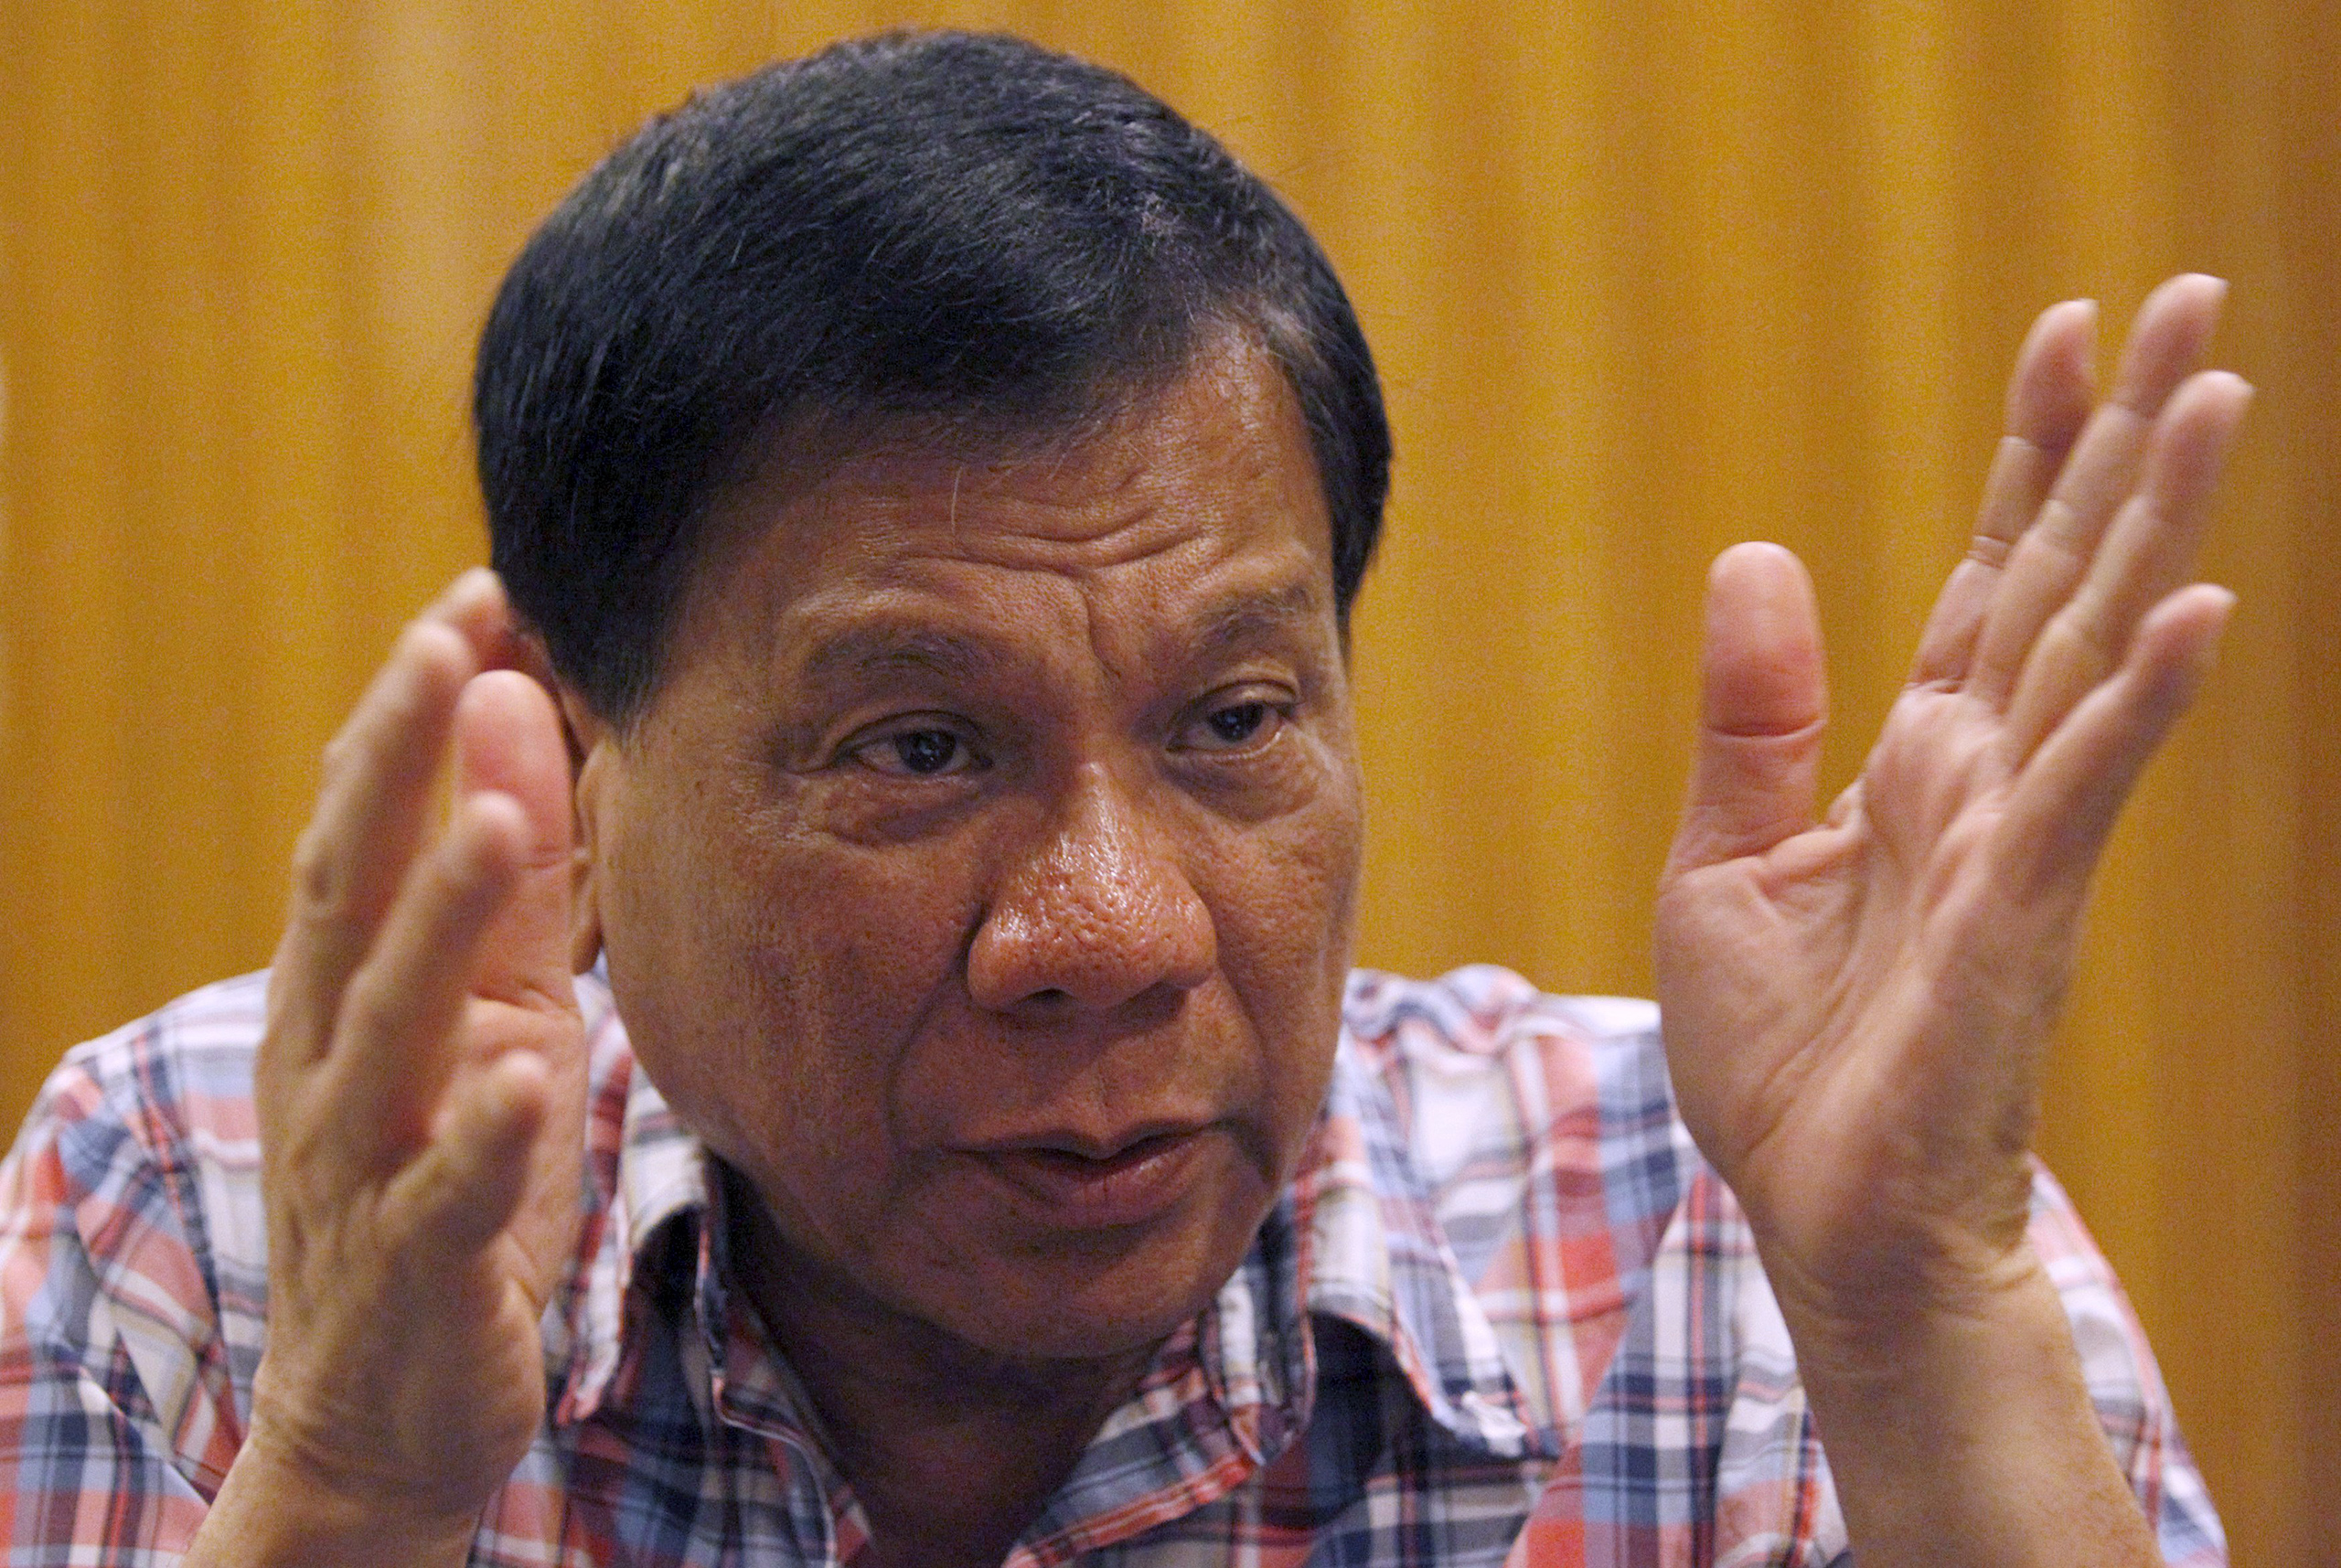 Rodrigo Duterte, the seven-term mayor of Davao City who has built a reputation for fighting crime in the insurgency-plagued south, gestures during an interview in Manila on Dec. 10, 2015 (Czar Dancel—Reuters)